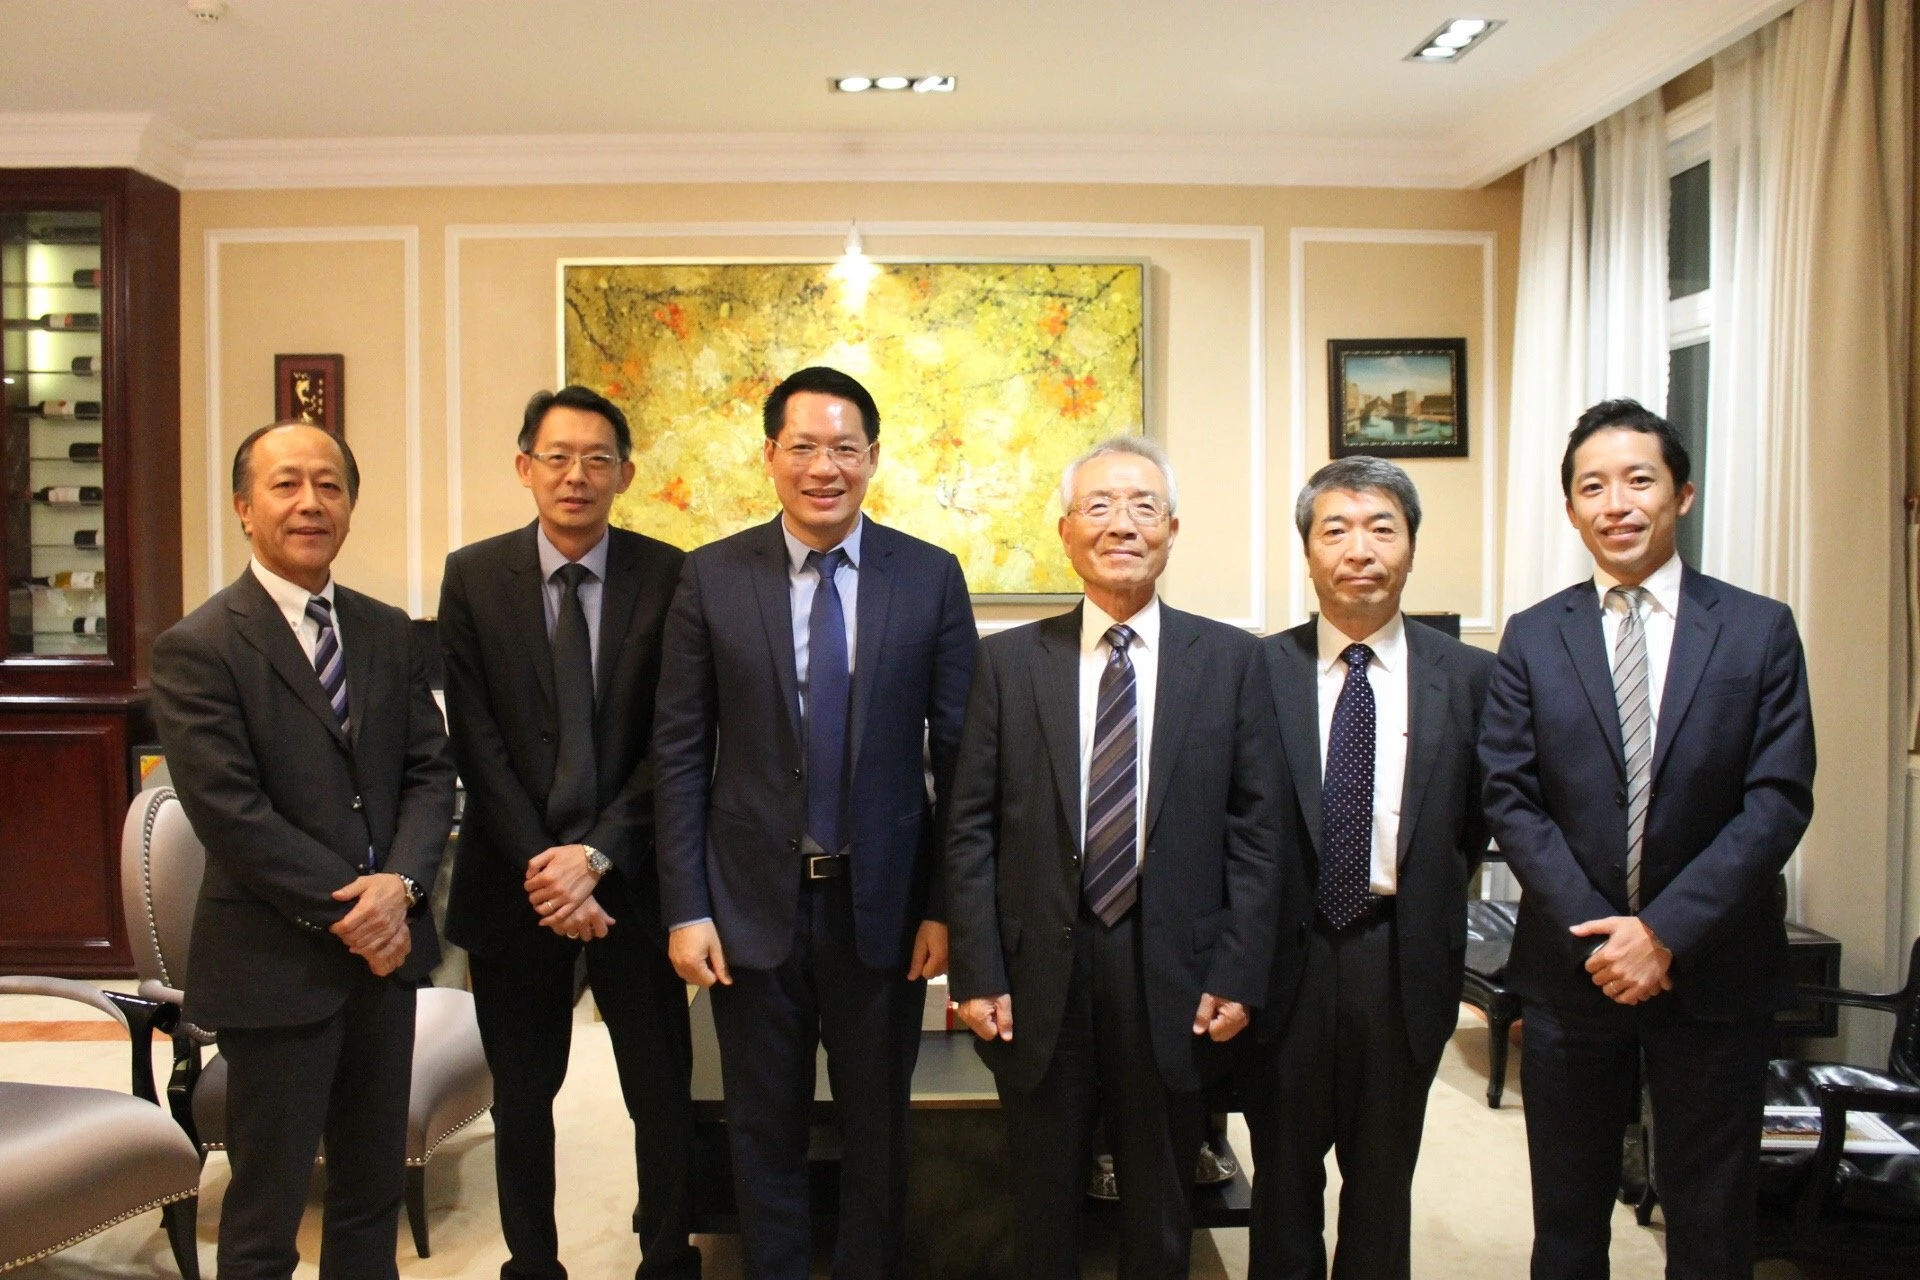 Delegates from Shinetsu corporation (Japan) visited and worked at Quoc Huy Anh corp.